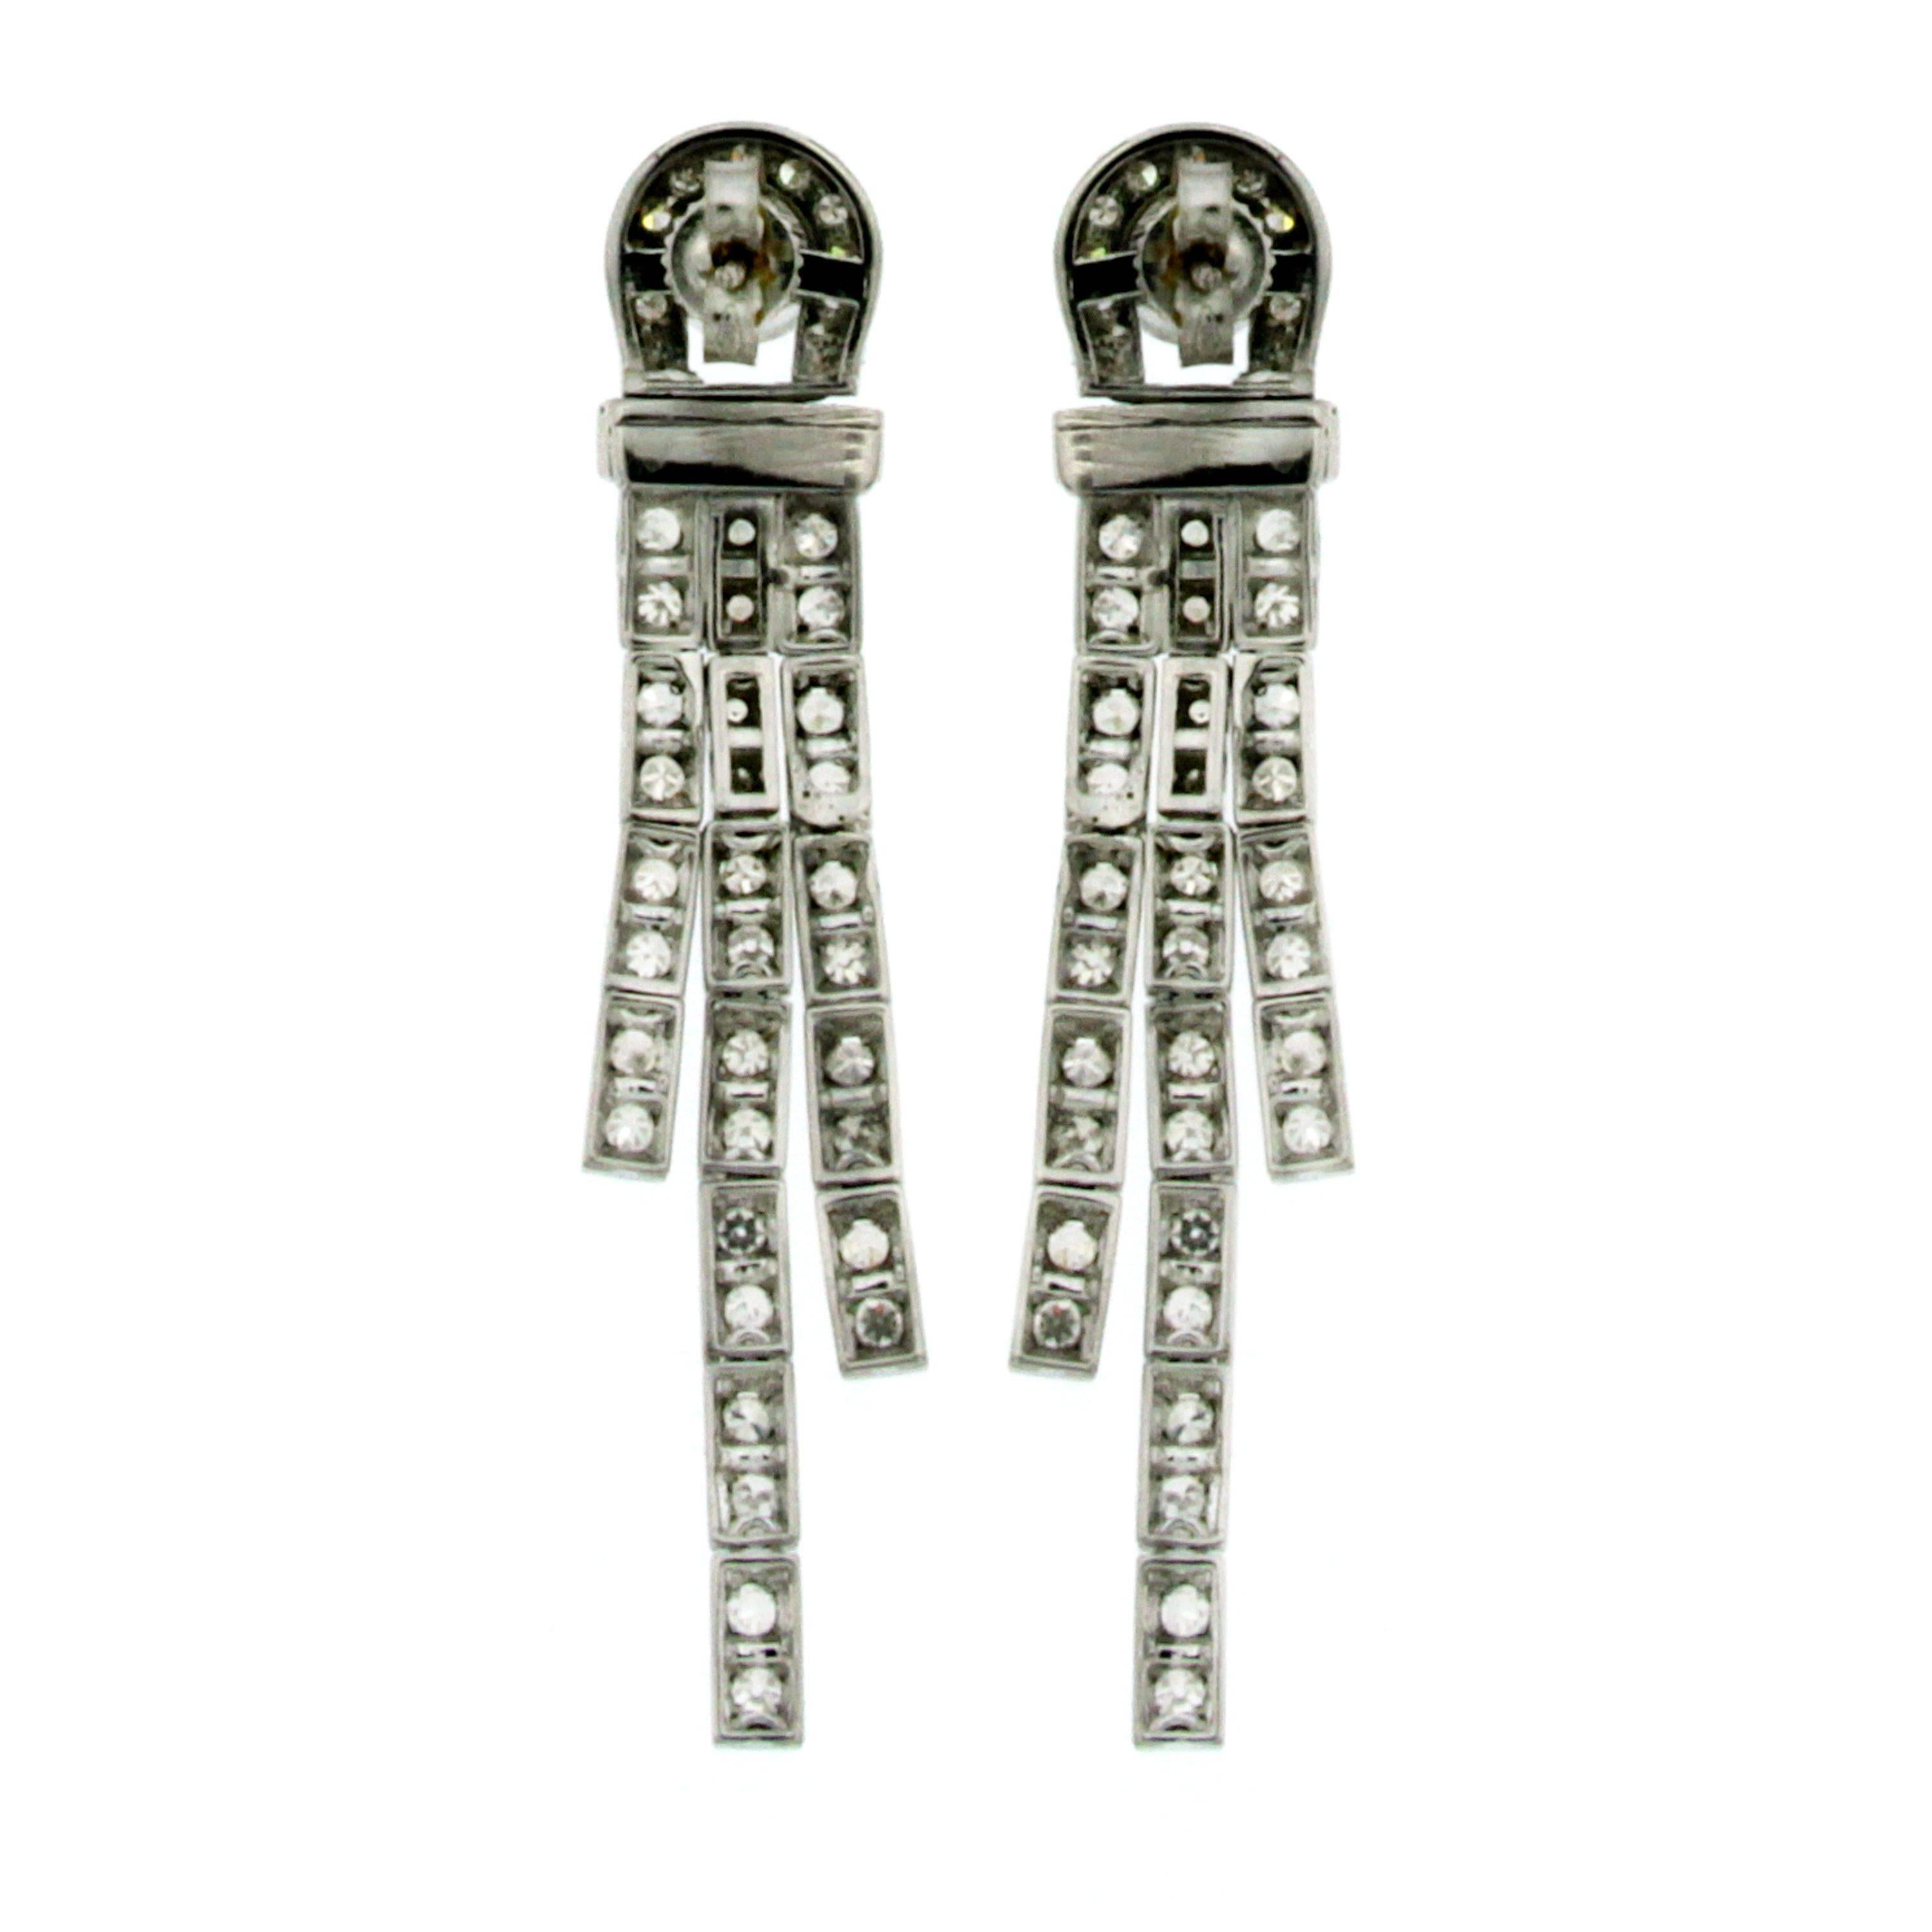 These Beautiful Art Deco 18k white gold earrings feature at the top 2 large Old Mine cut Diamonds weighing approx. 0,50 carats each, total weight 1 carat graded J color Vs clarity, connected by three rows of open links set with 96 colorless round